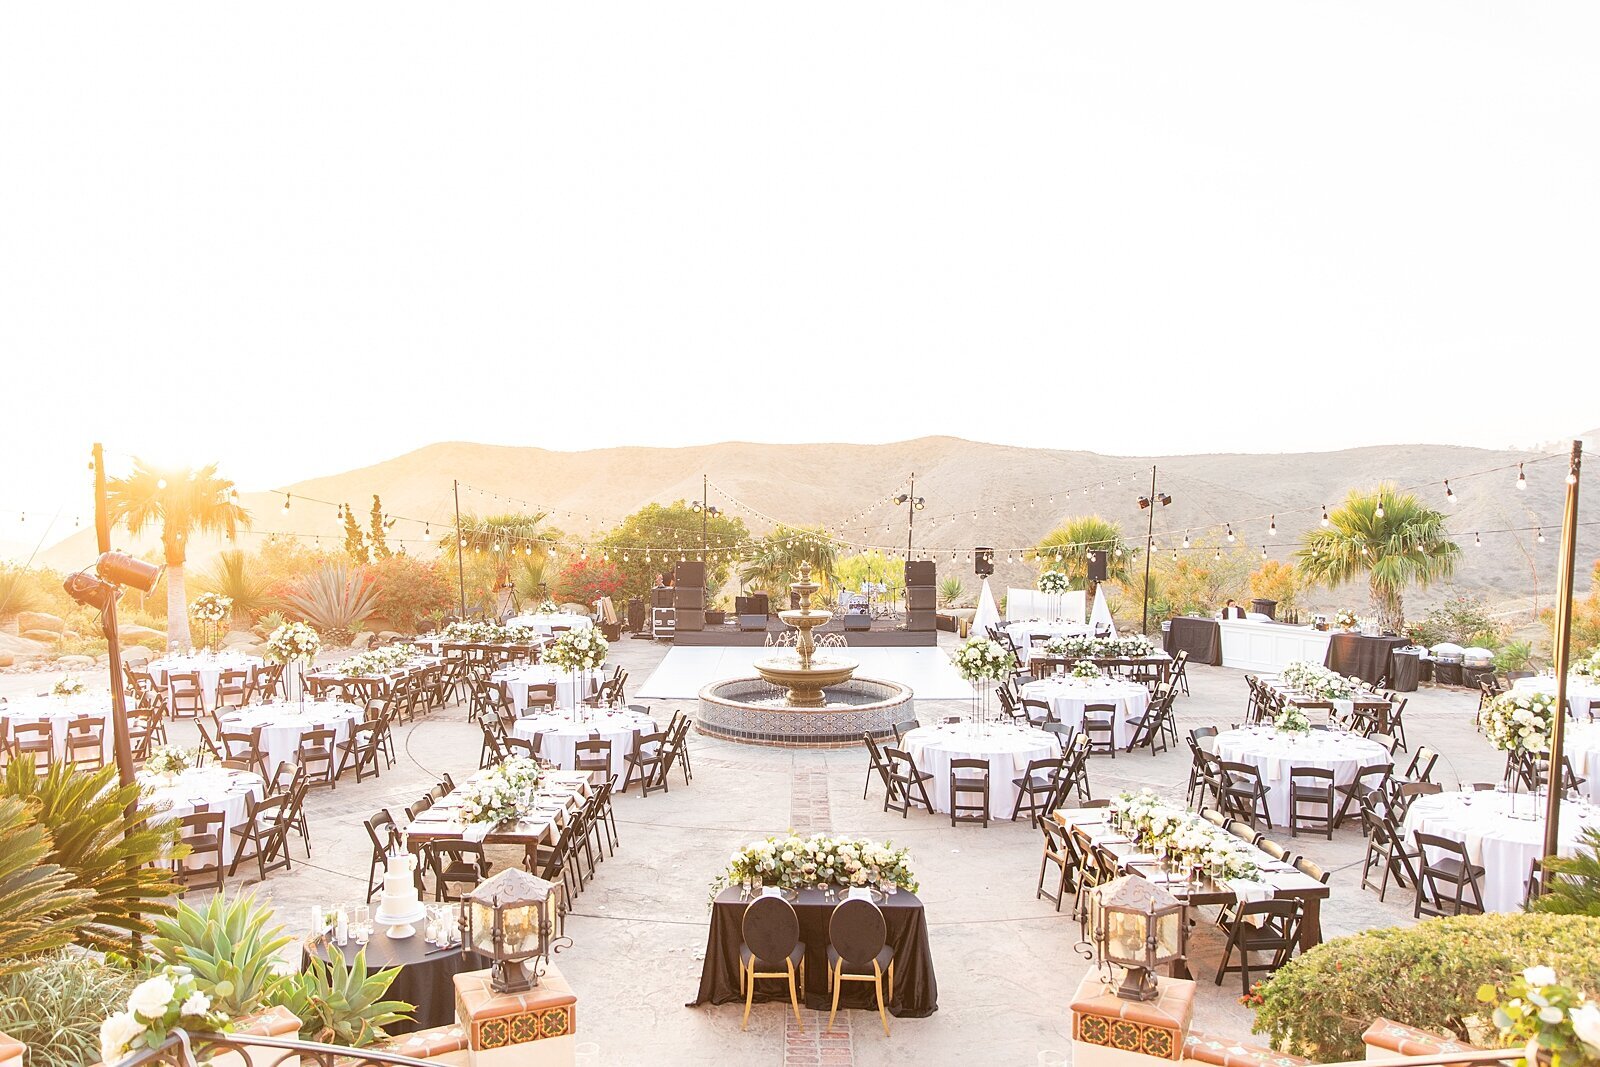 Black and white wedding reception at Hummingbird Ranch Estate in Los Angeles, California.